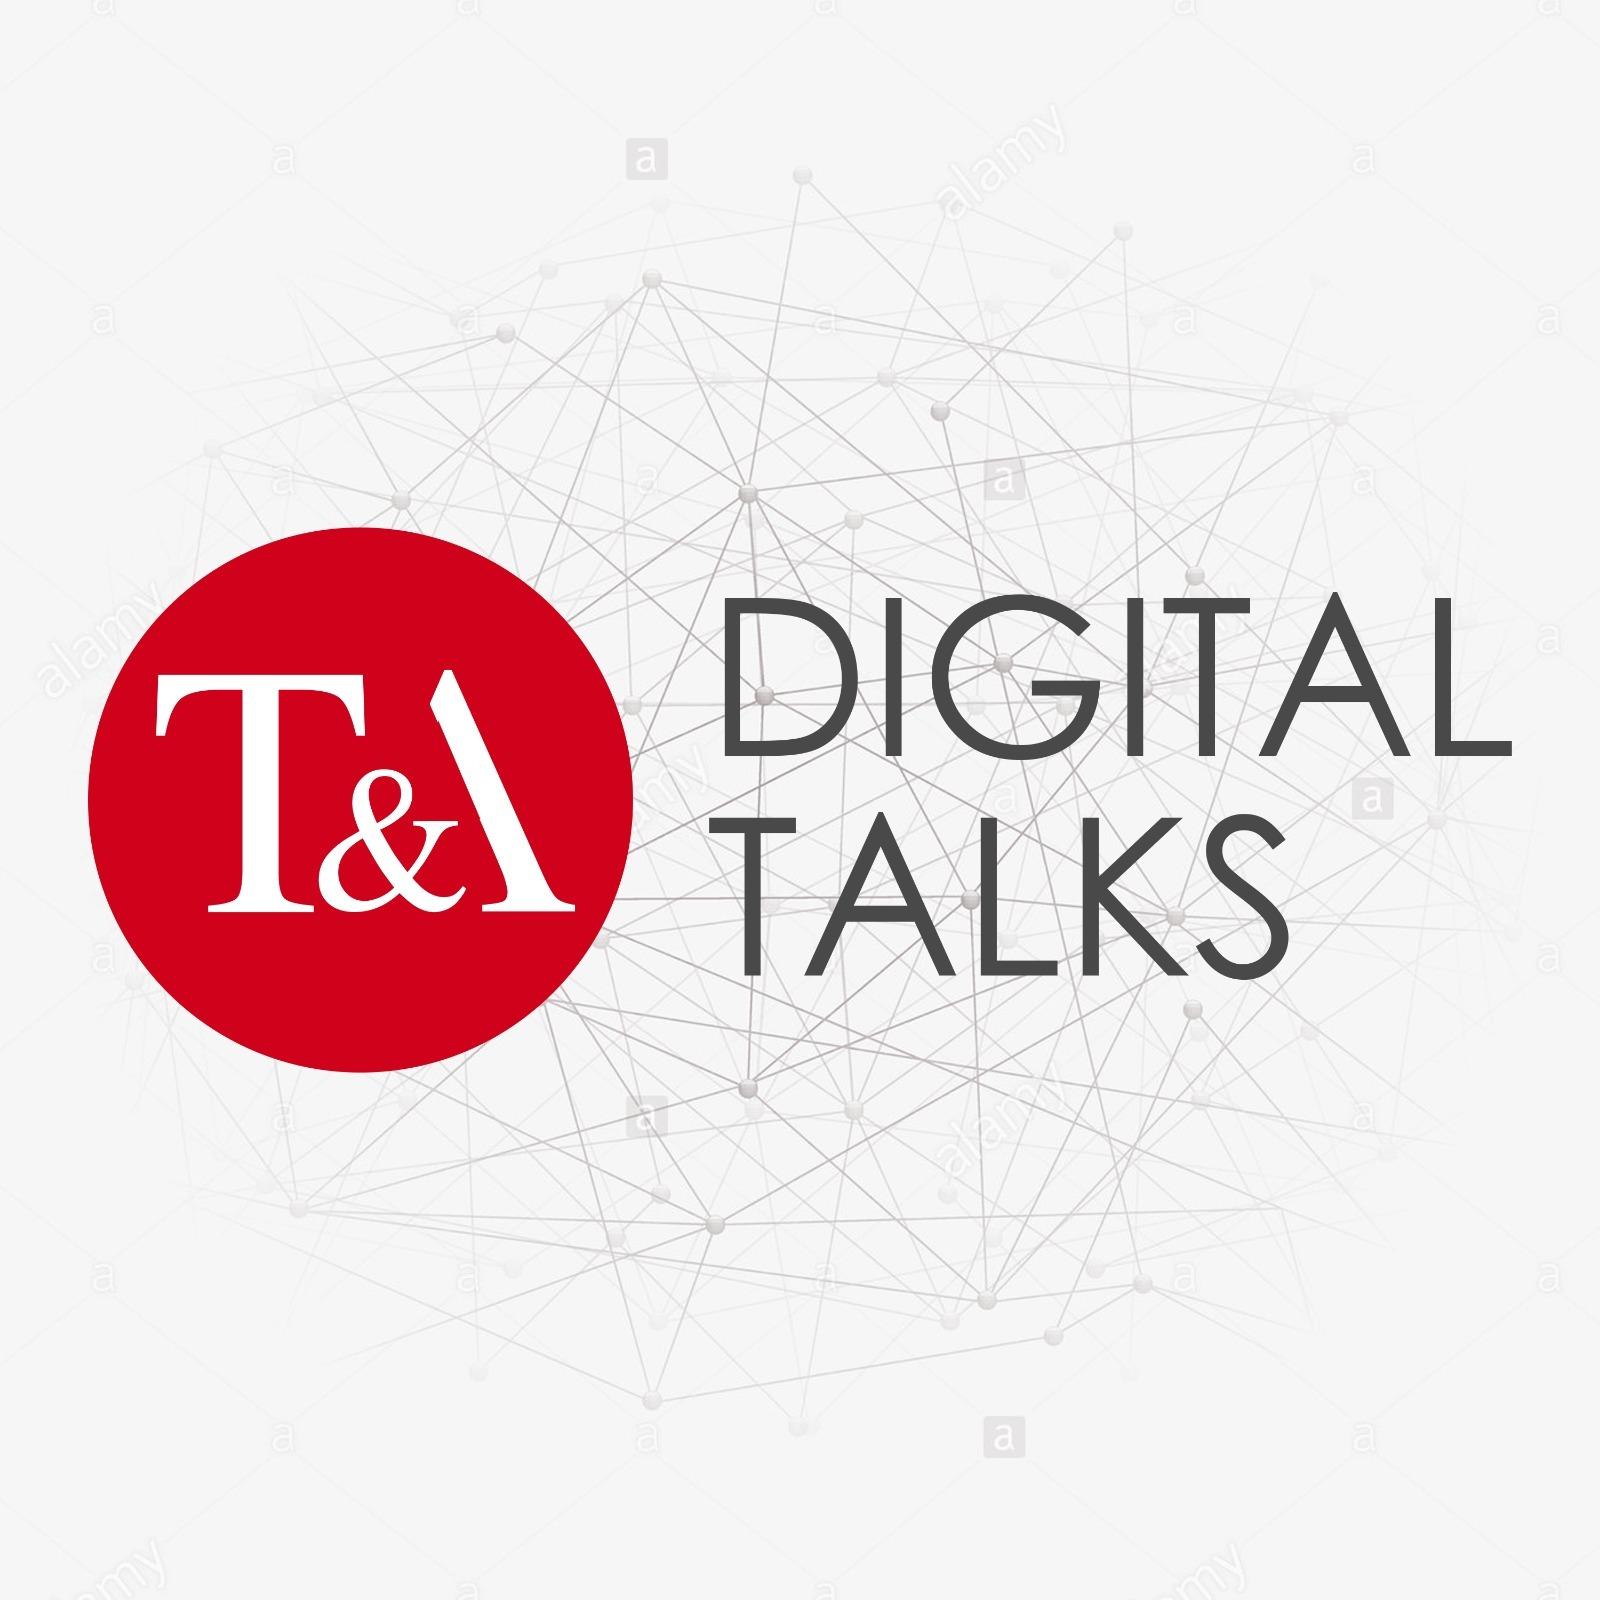 Digital talks with Terence & Alex